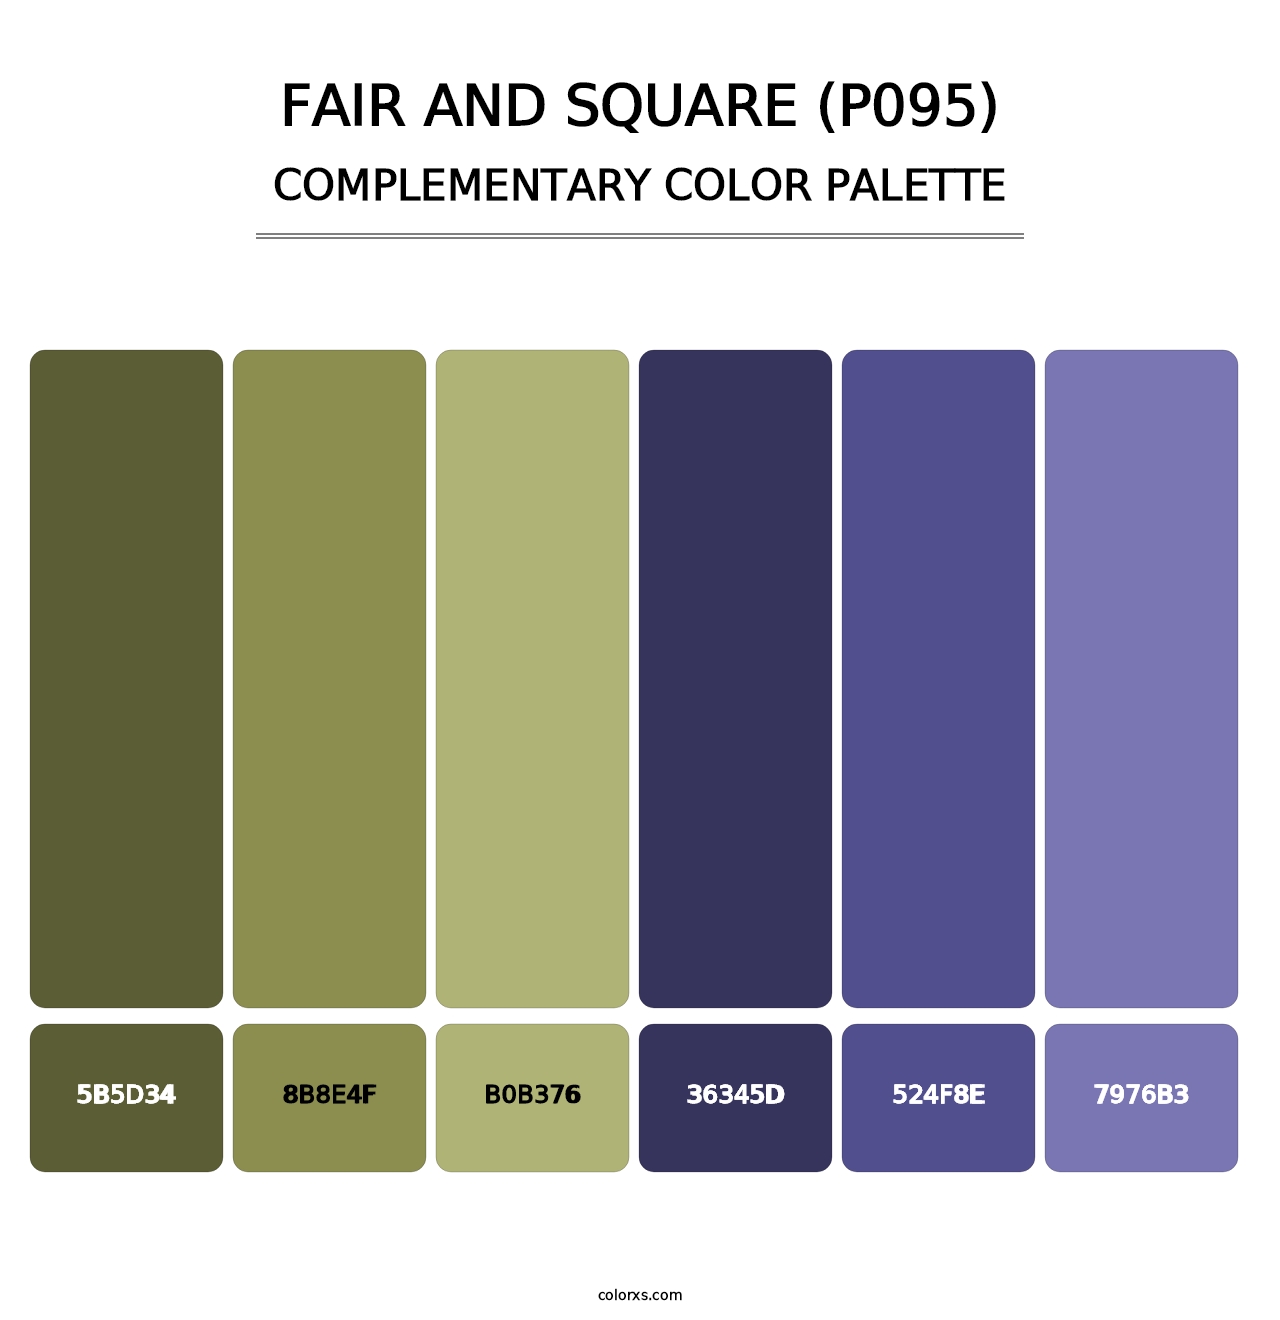 Fair and Square (P095) - Complementary Color Palette